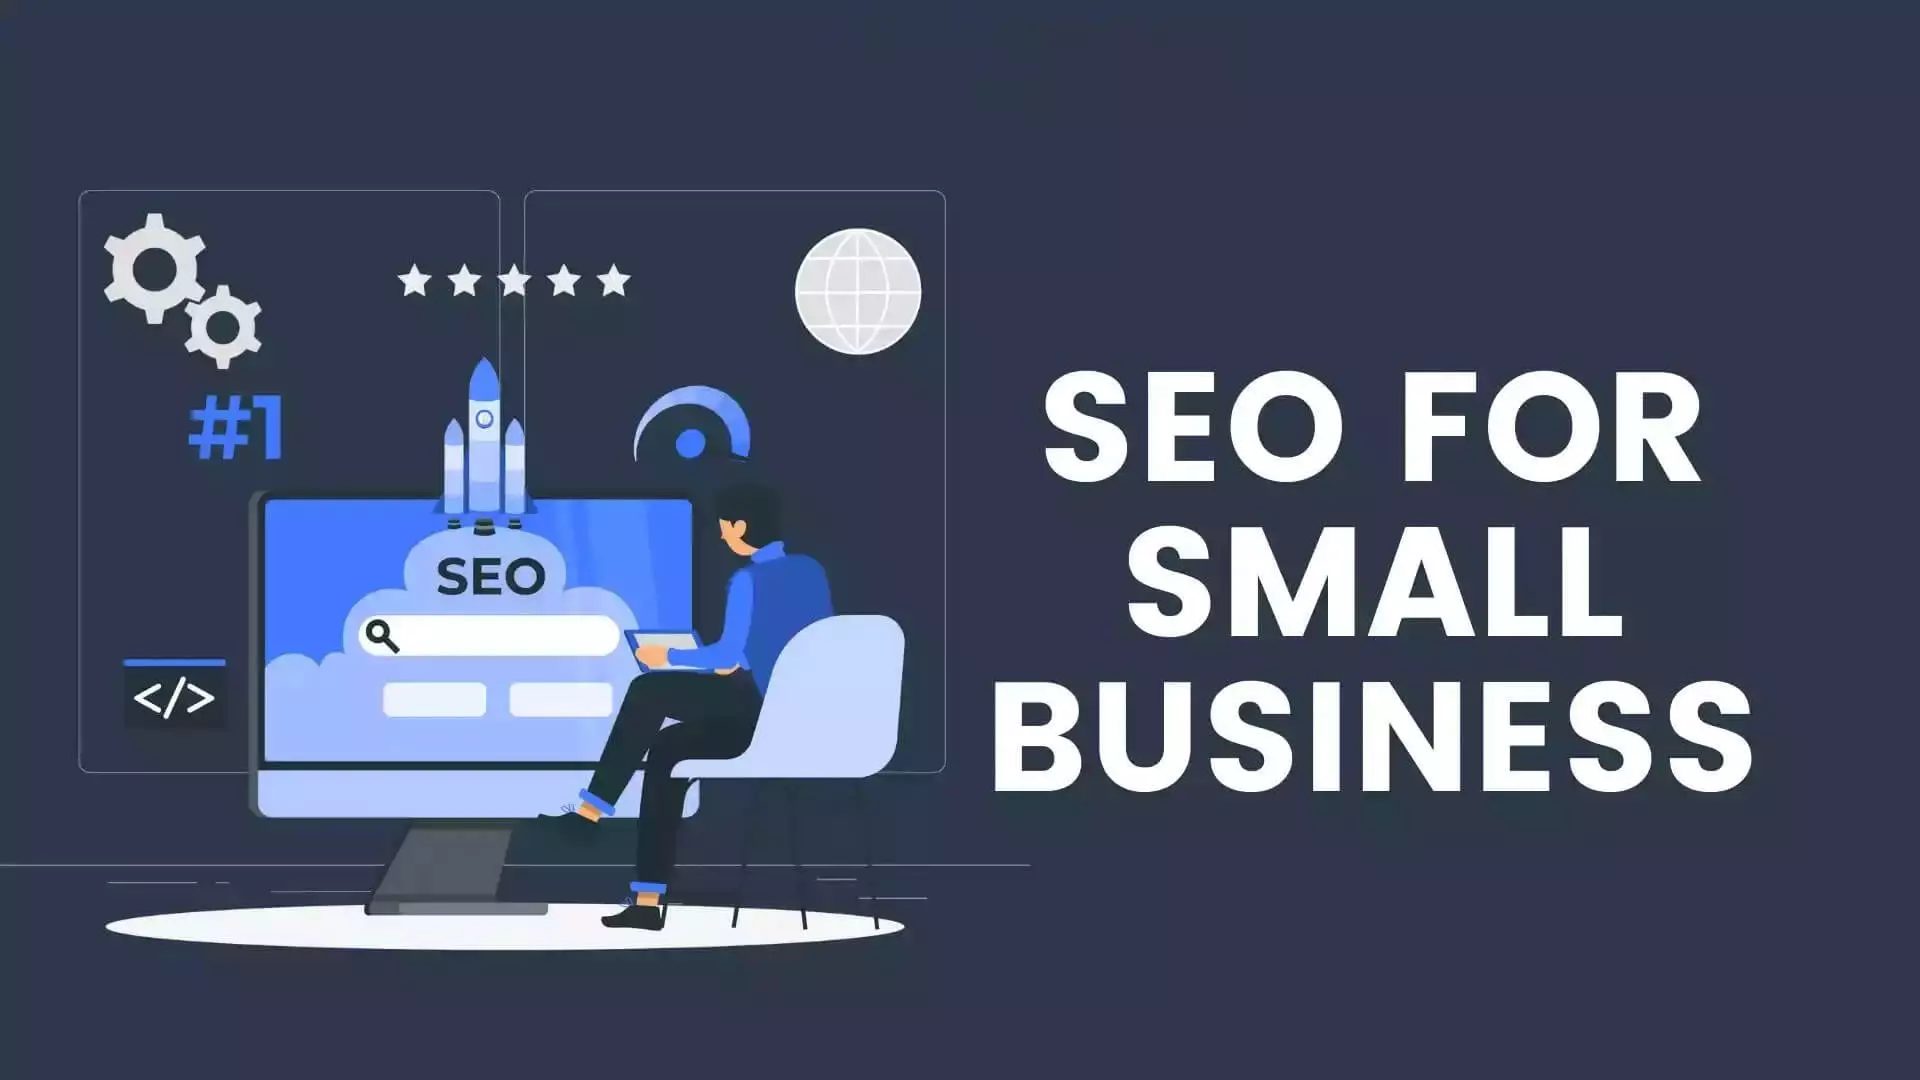 Search-Engine-Optimization-for-Small-Businesses